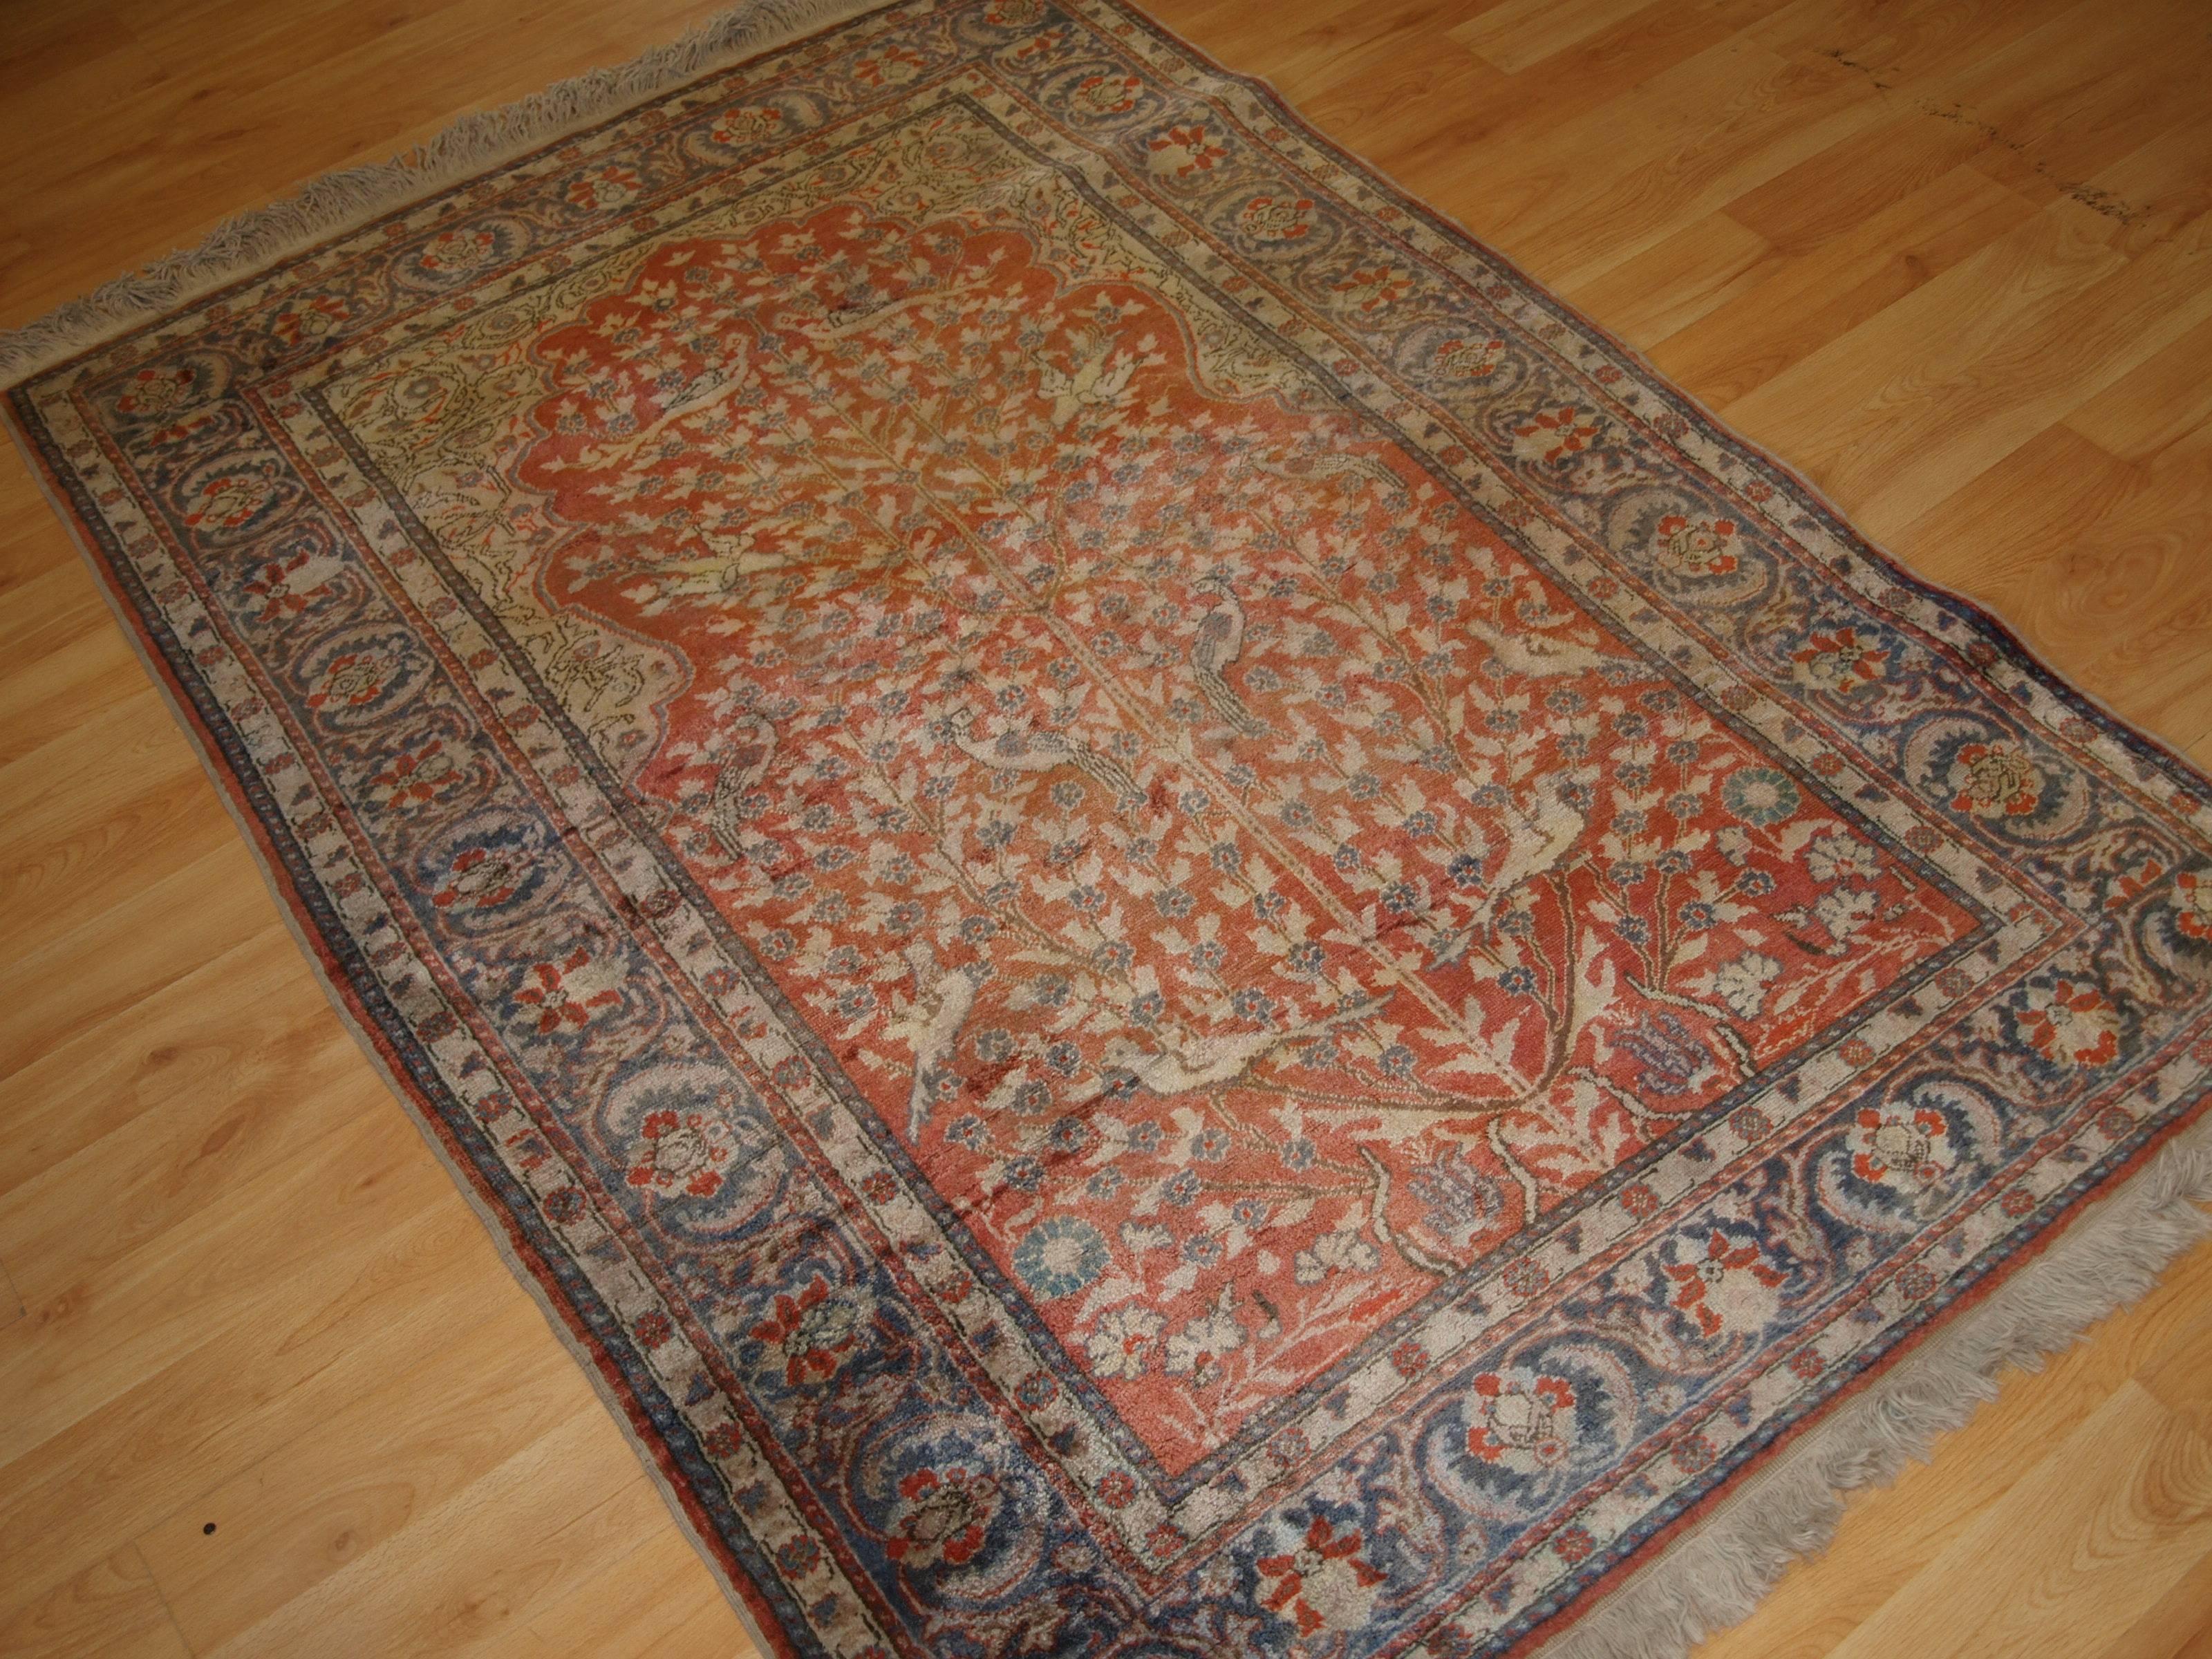 Life prayer design, circa 1920.
Size: 5ft 8in x 3ft 11in (172 x 120cm).

Antique Anatolian Kayseri 'art silk' prayer rug, beautifully drawn with a tree of life and birds.

circa 1920.

'Art Silk' is a widely accepted term for cotton that has